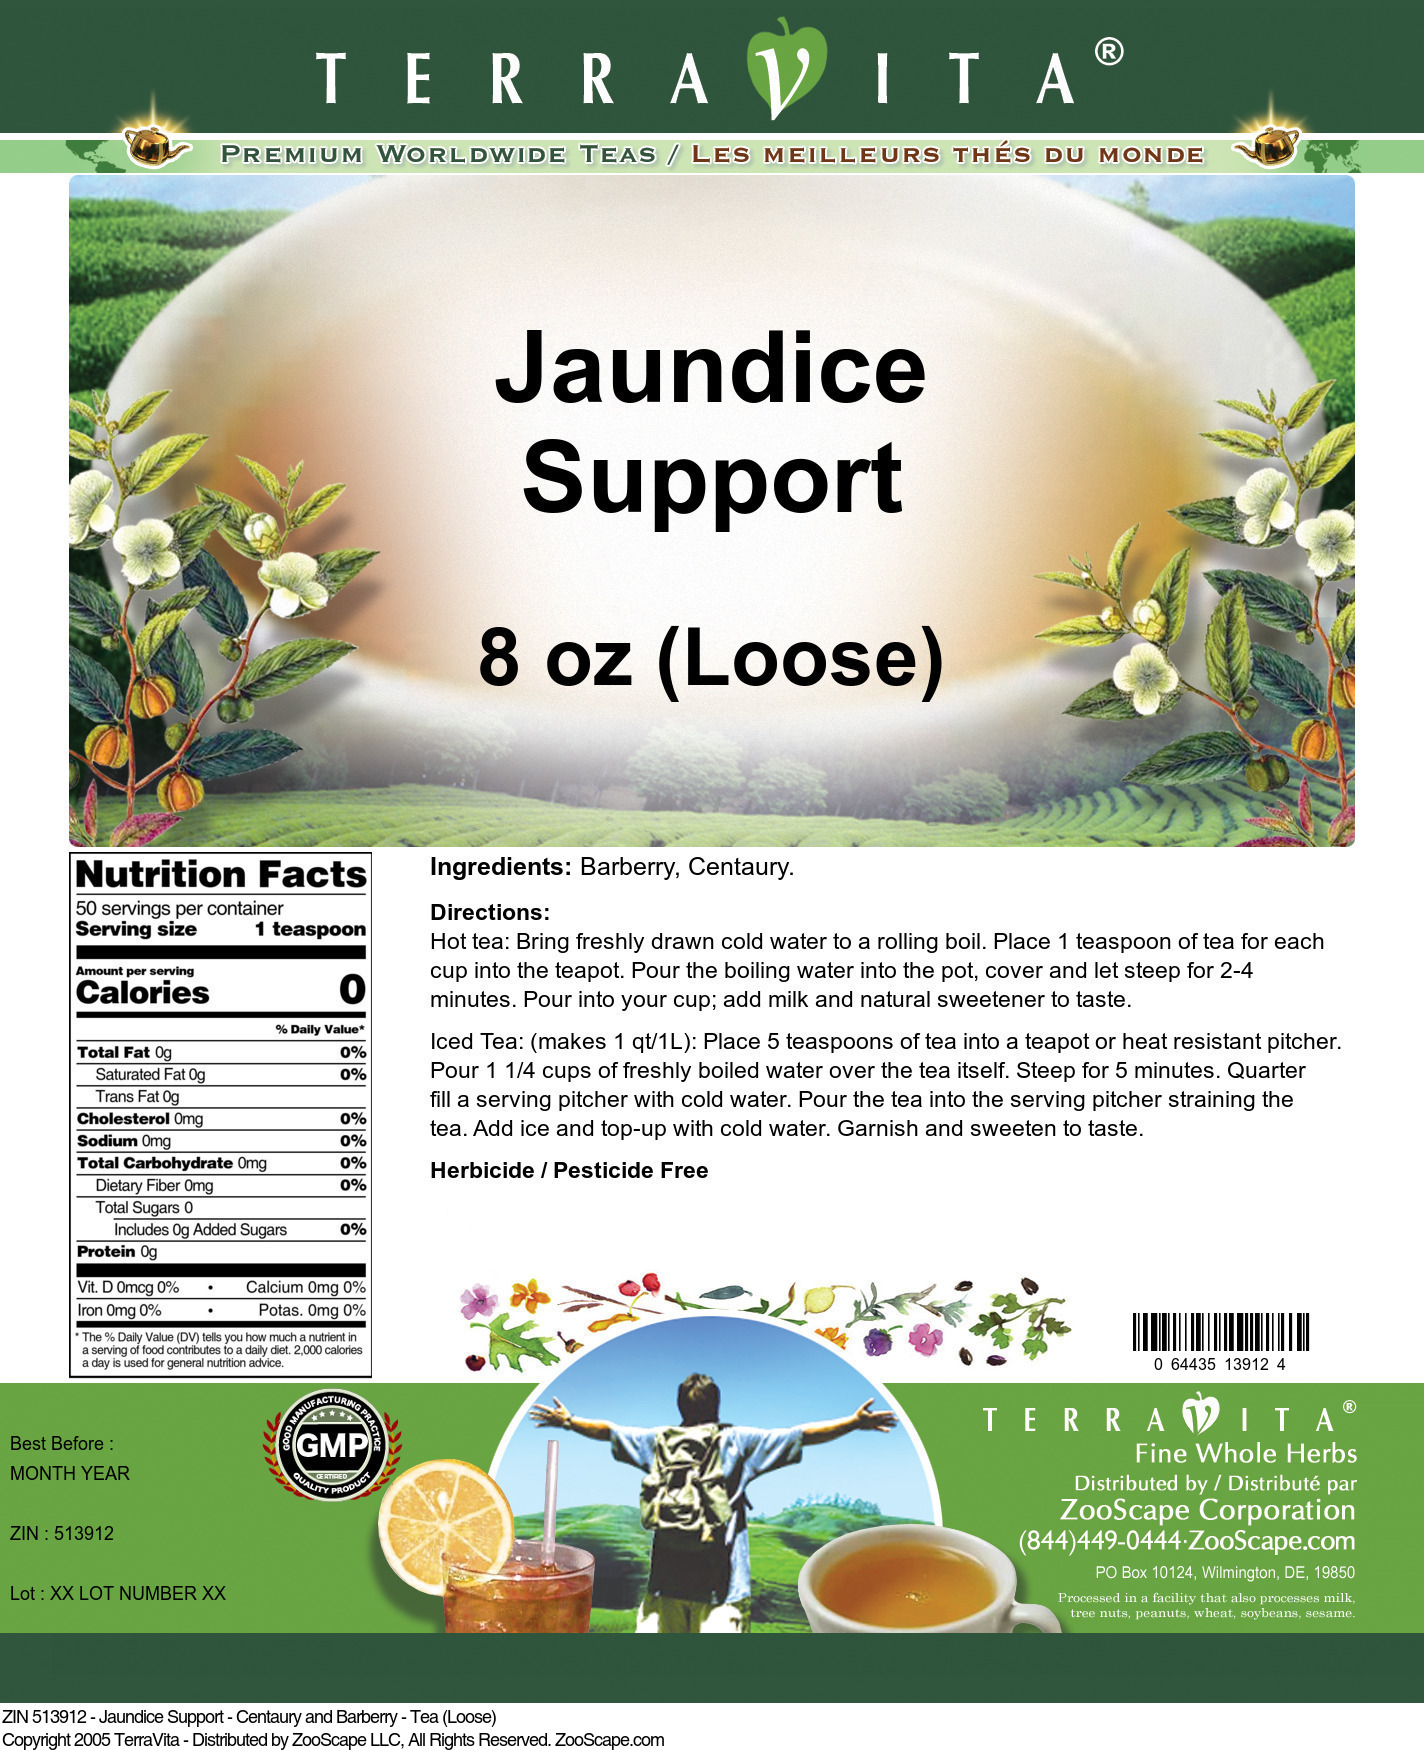 Jaundice Support - Centaury and Barberry - Tea (Loose) - Label